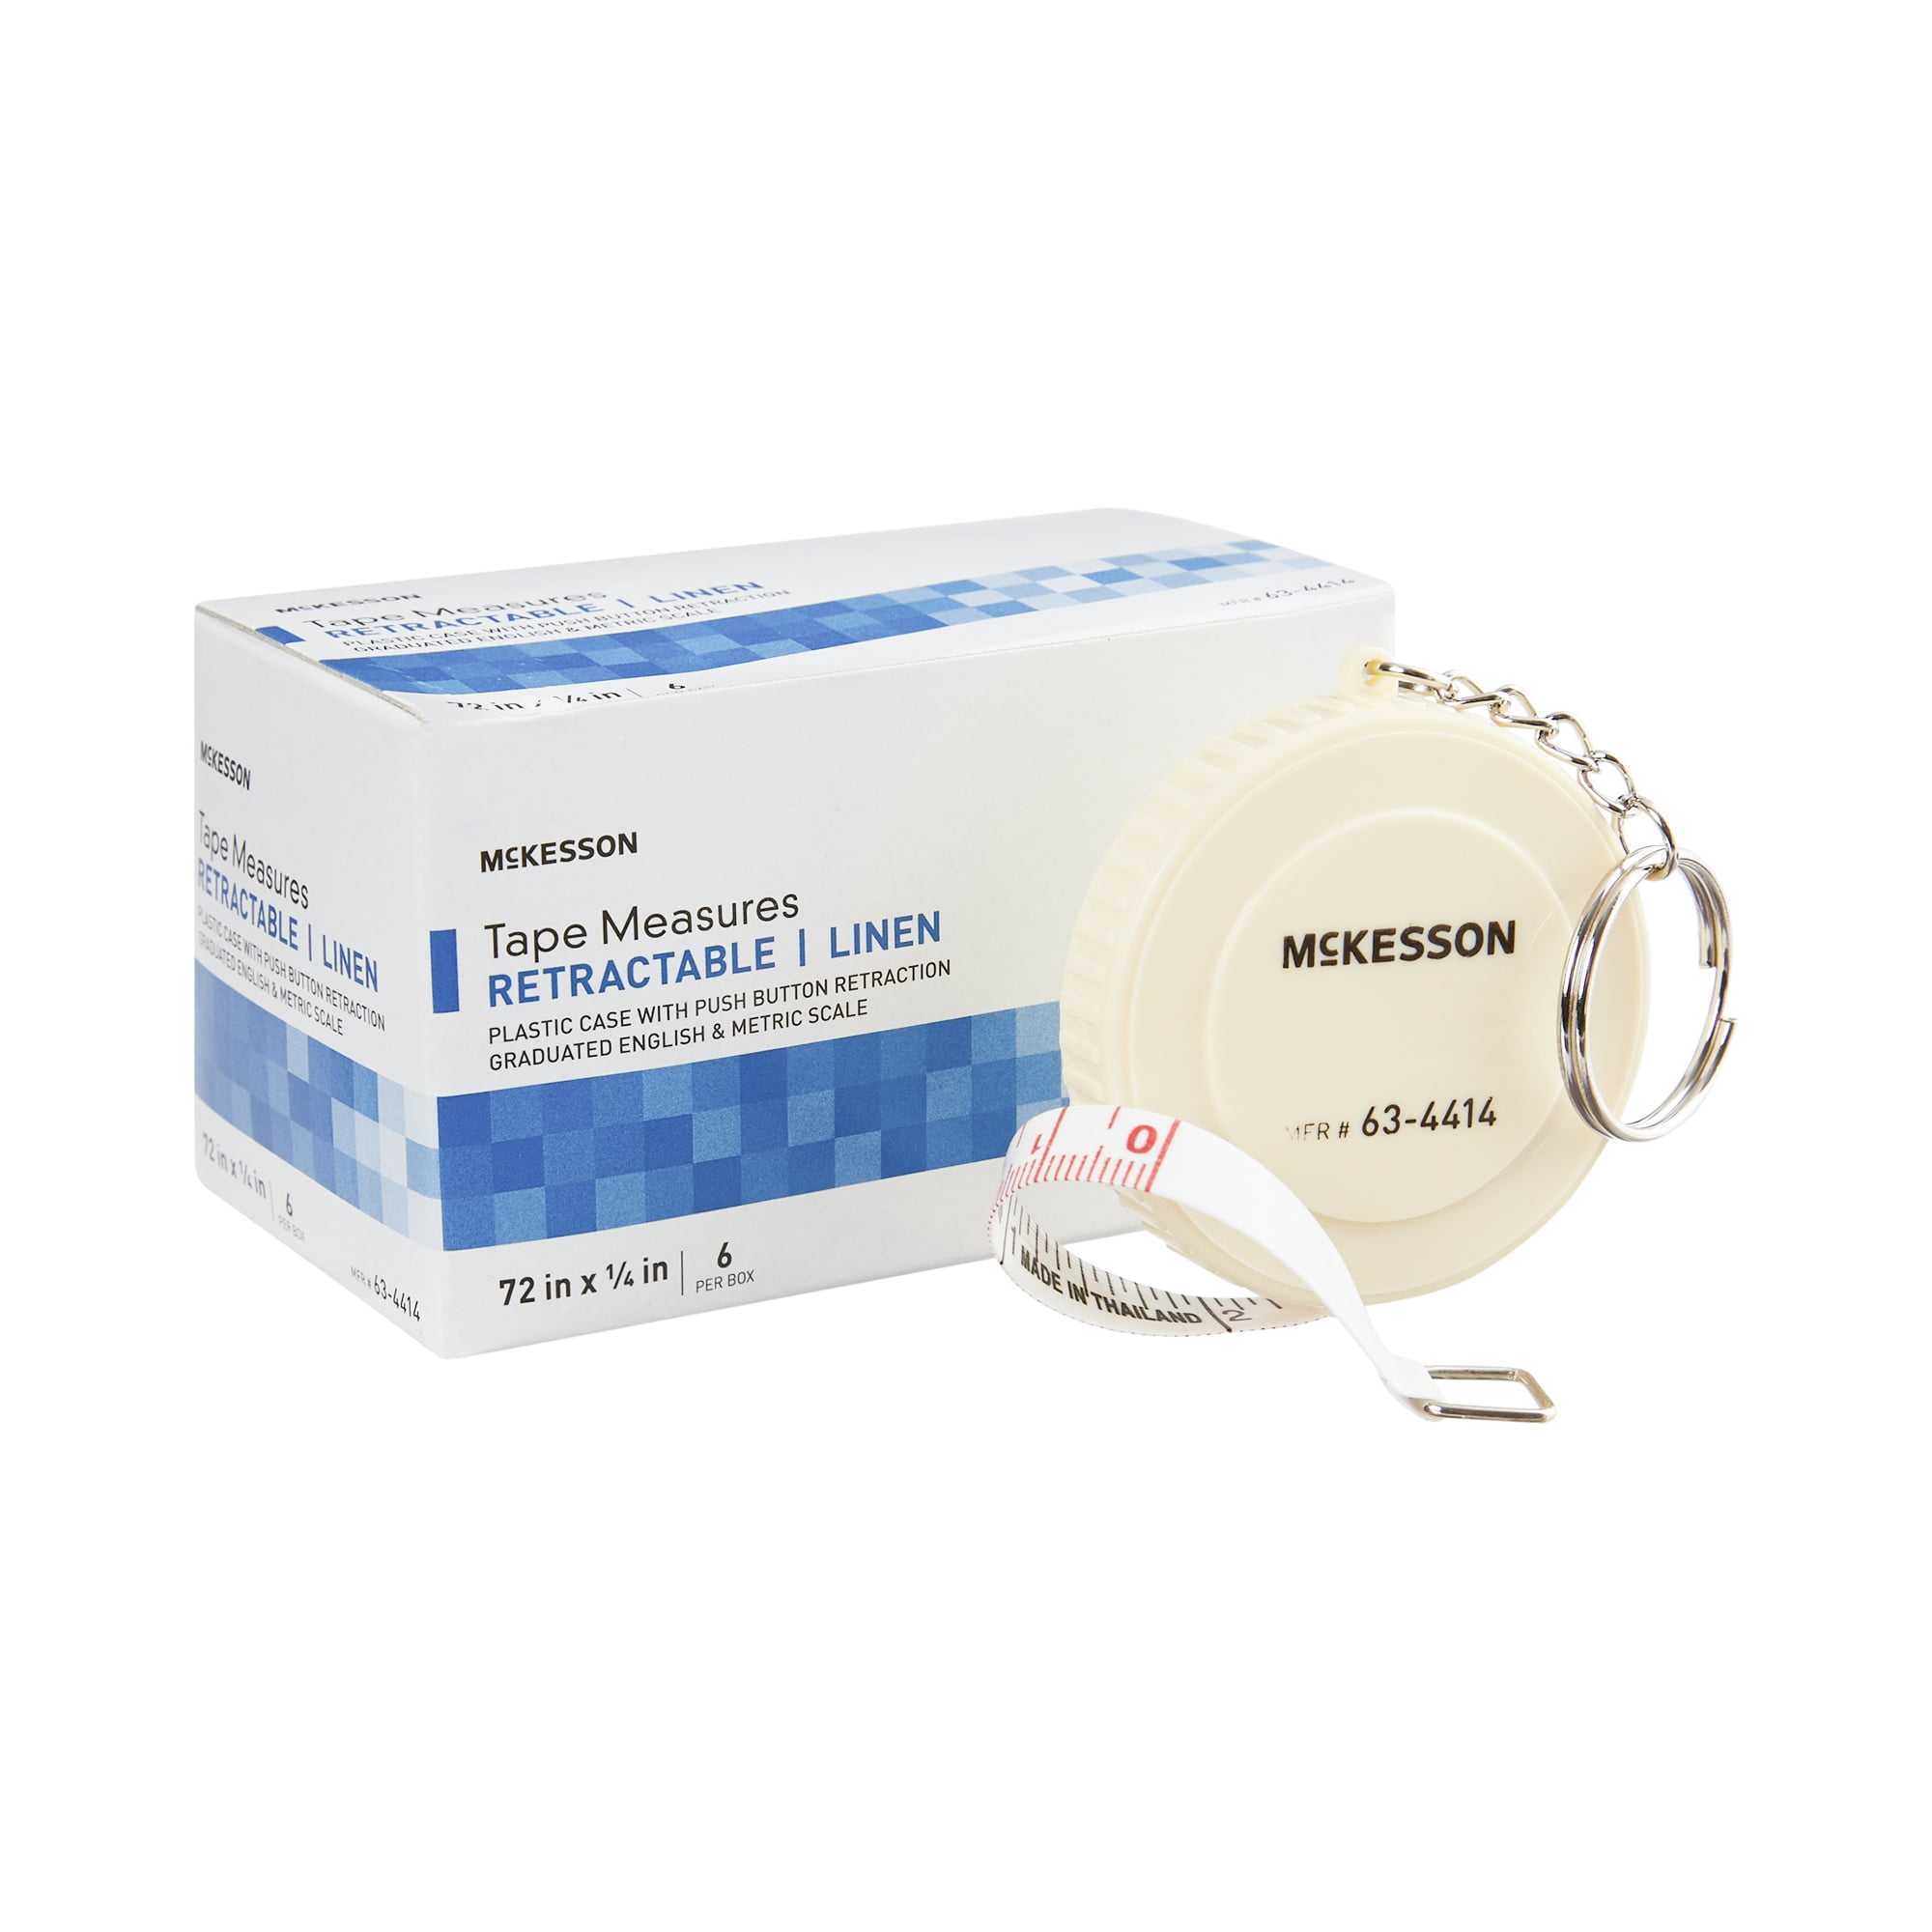 Baseline woven measurement tape with push-button retractor, 120